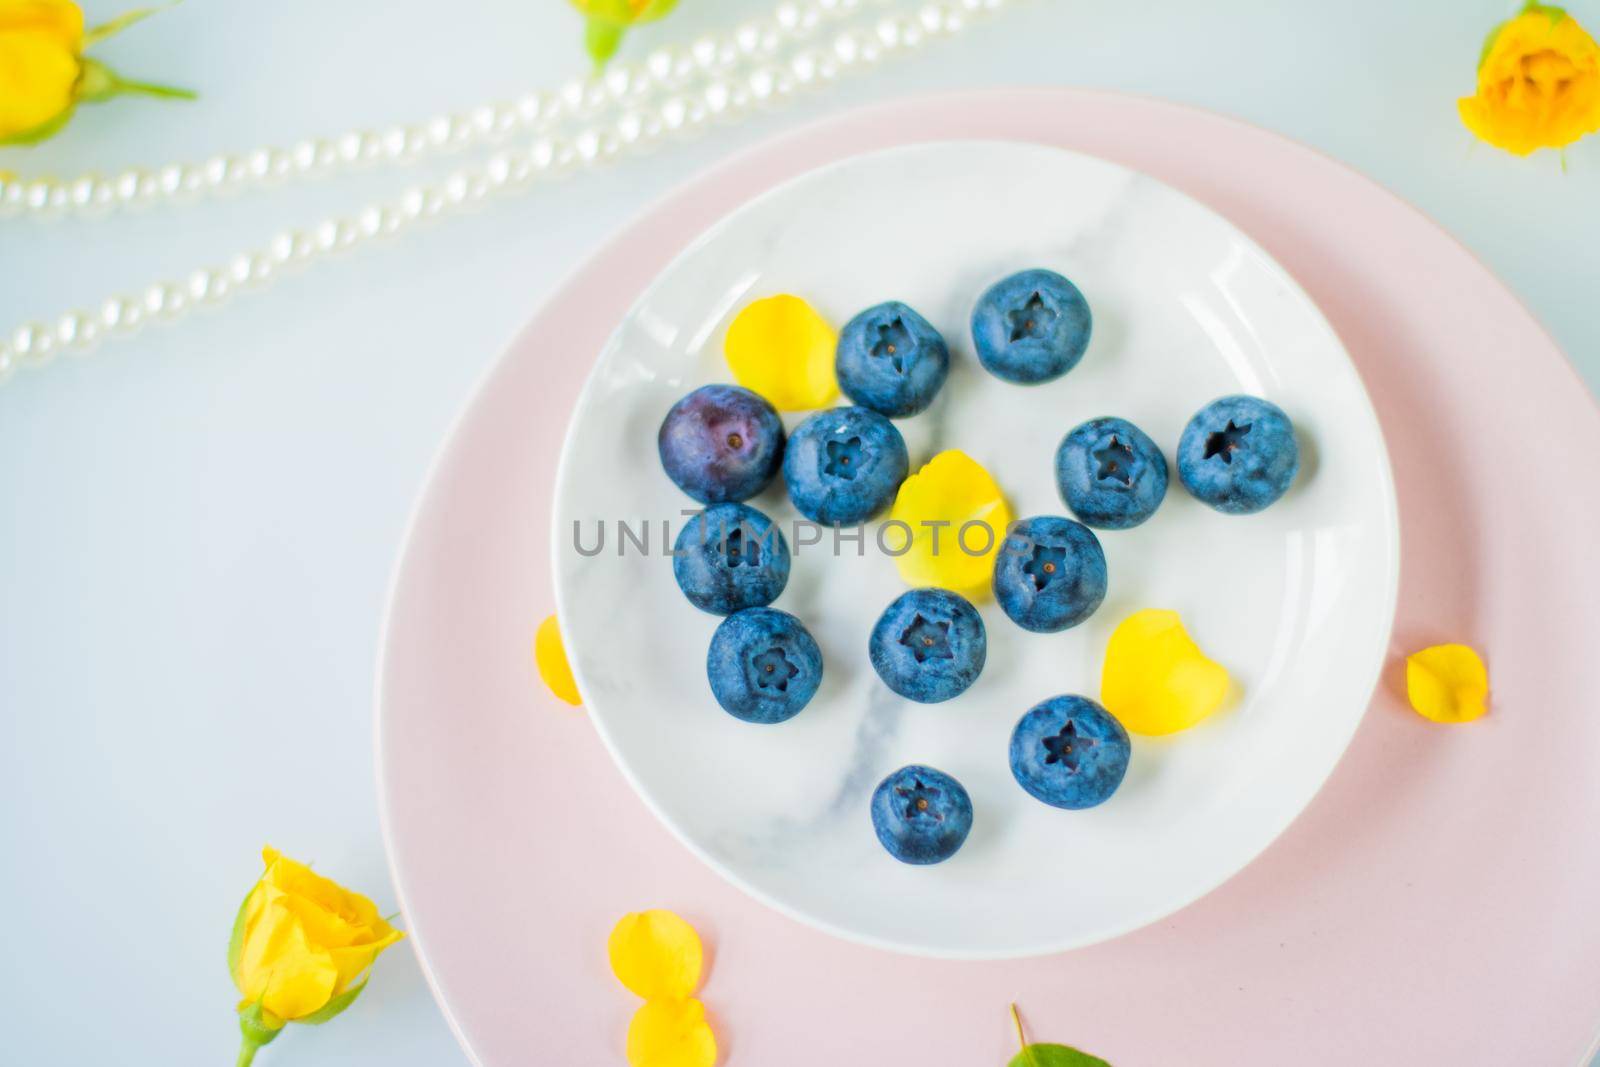 beautiful bluberries - fresh fruits and healthy eating styled concept, elegant visuals